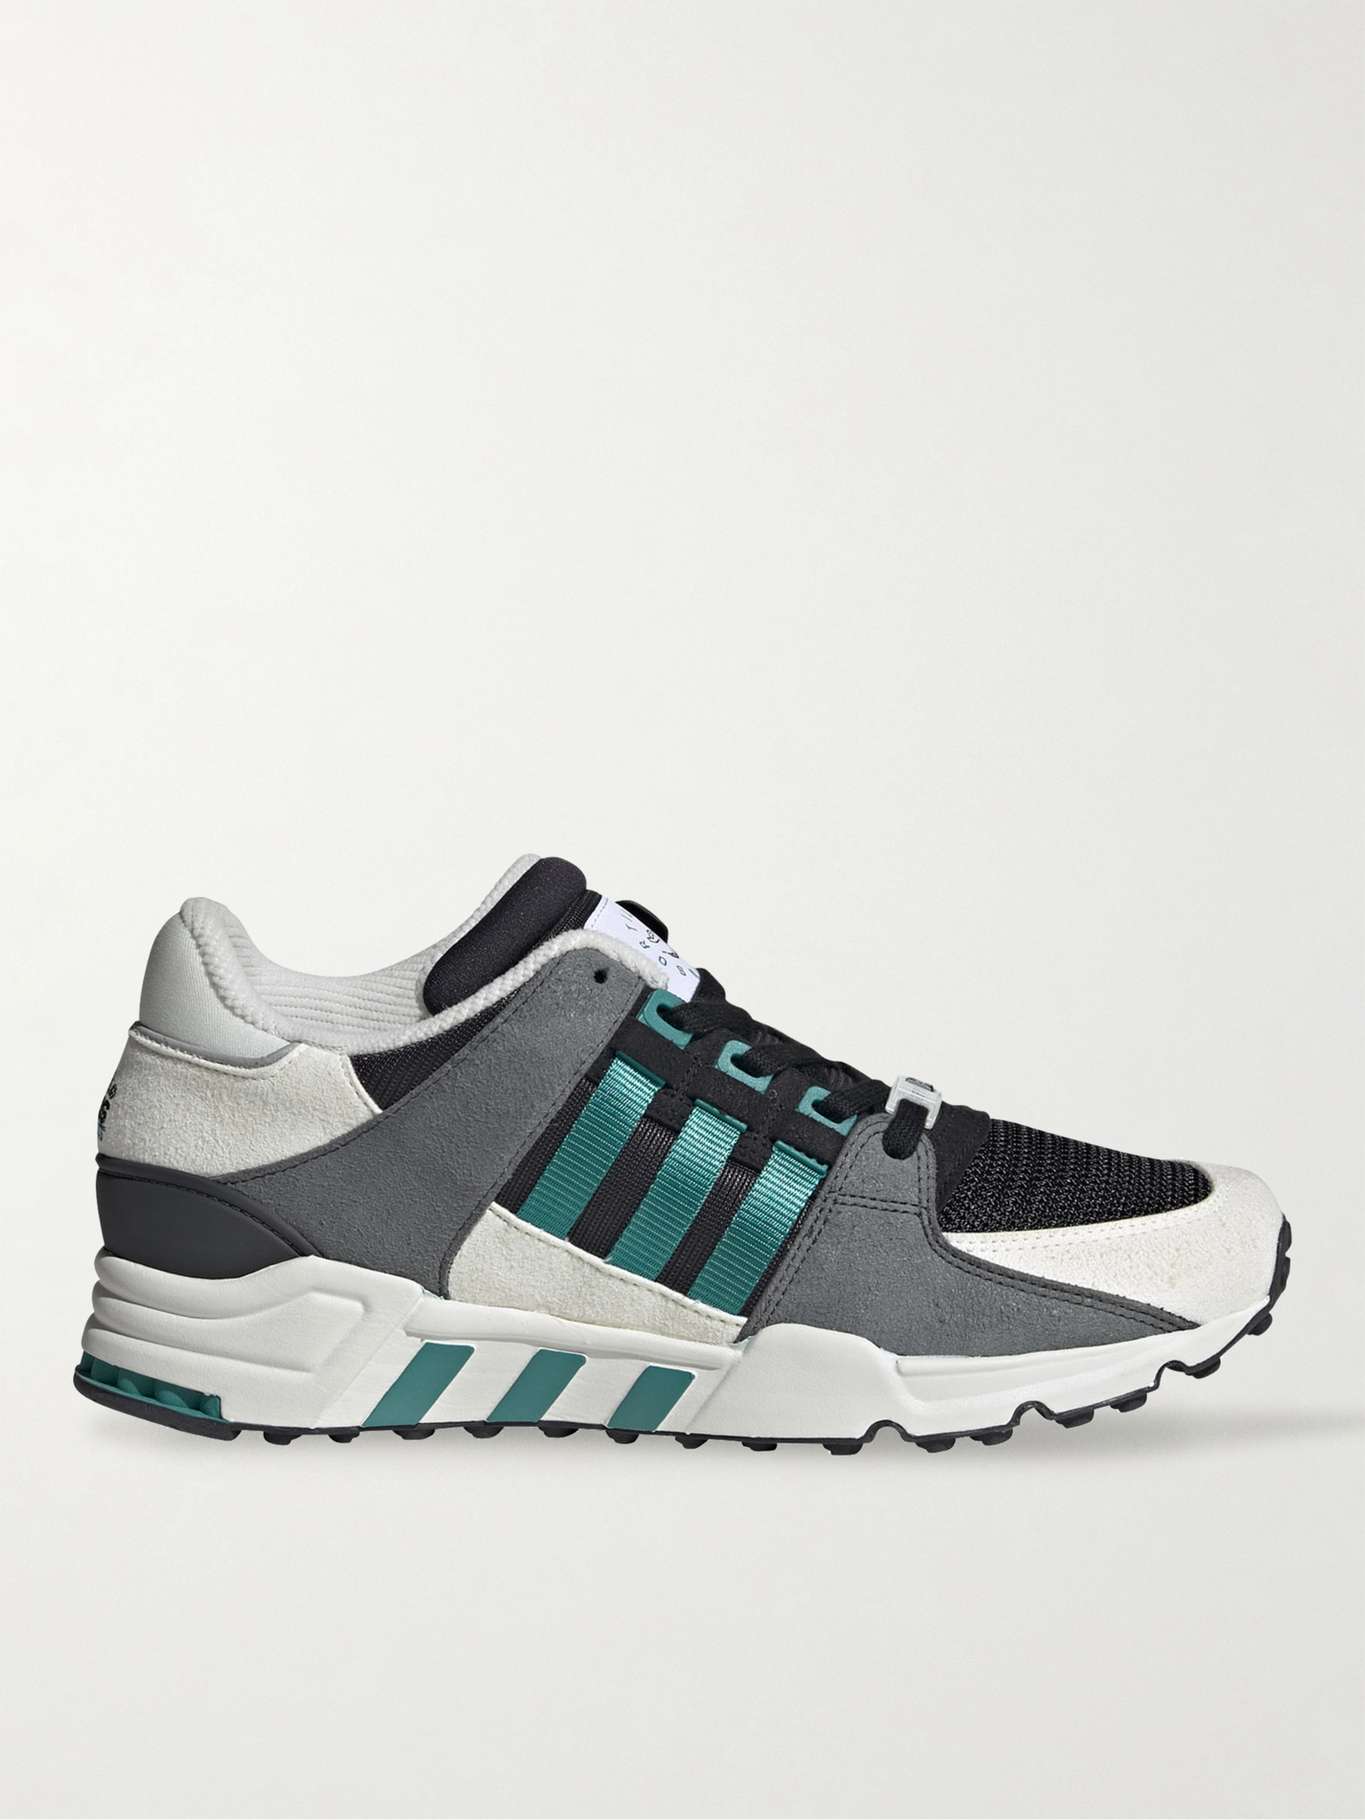 mrporter.com | EQT Support 93 Canvas-Trimmed Suede and Mesh Sneakers